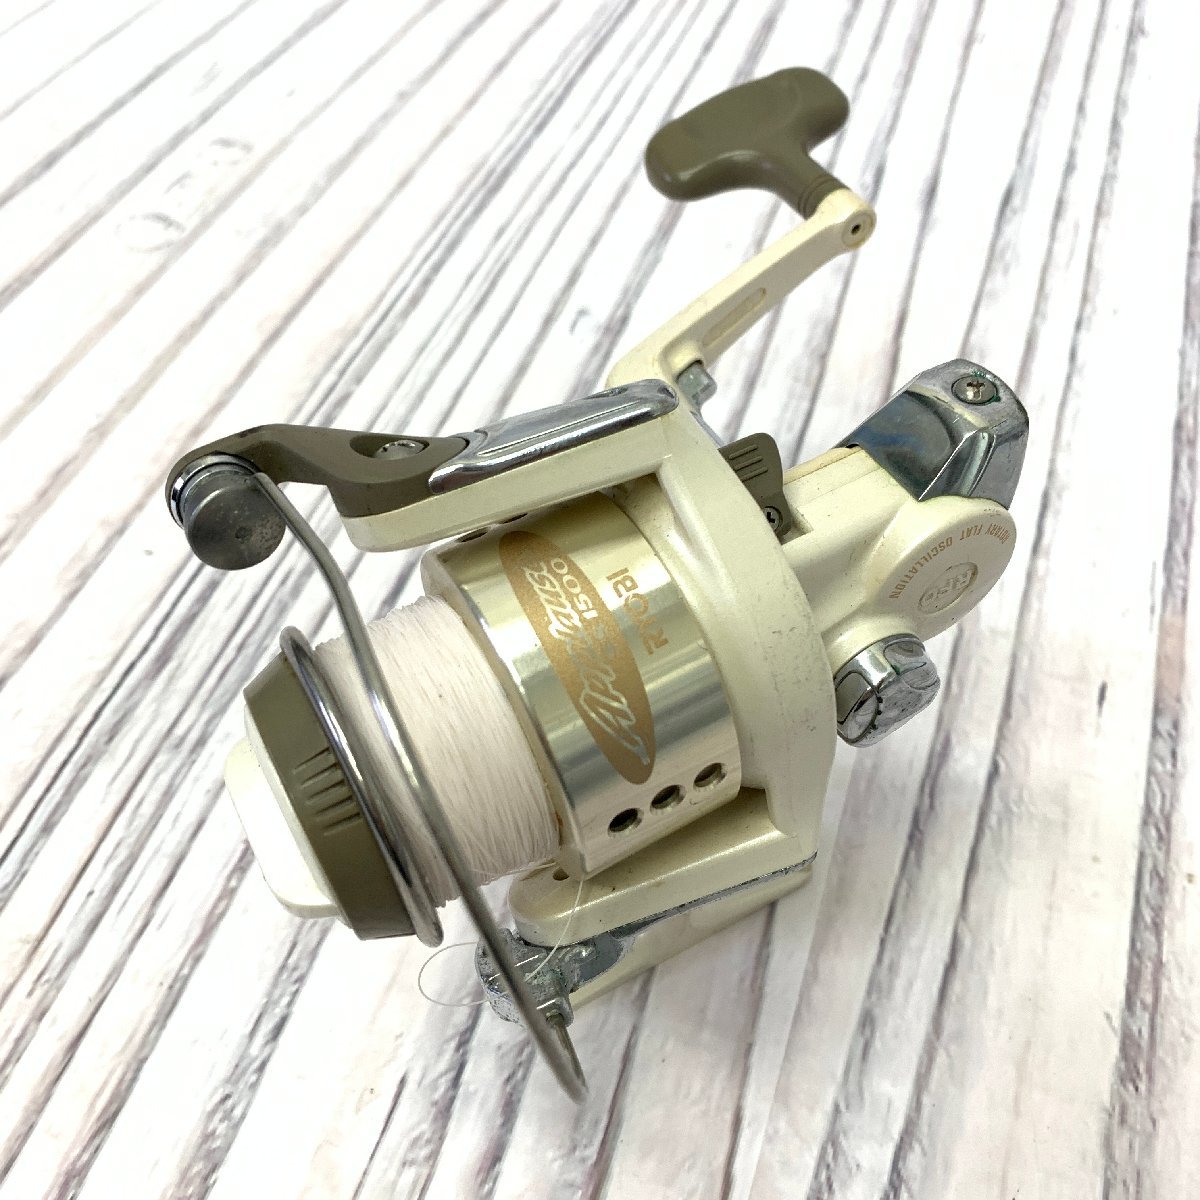 s001 M3 operation unknown RYOBI Ryobi spinning reel APPIause SS1500i reel  used Junk storage goods : Real Yahoo auction salling